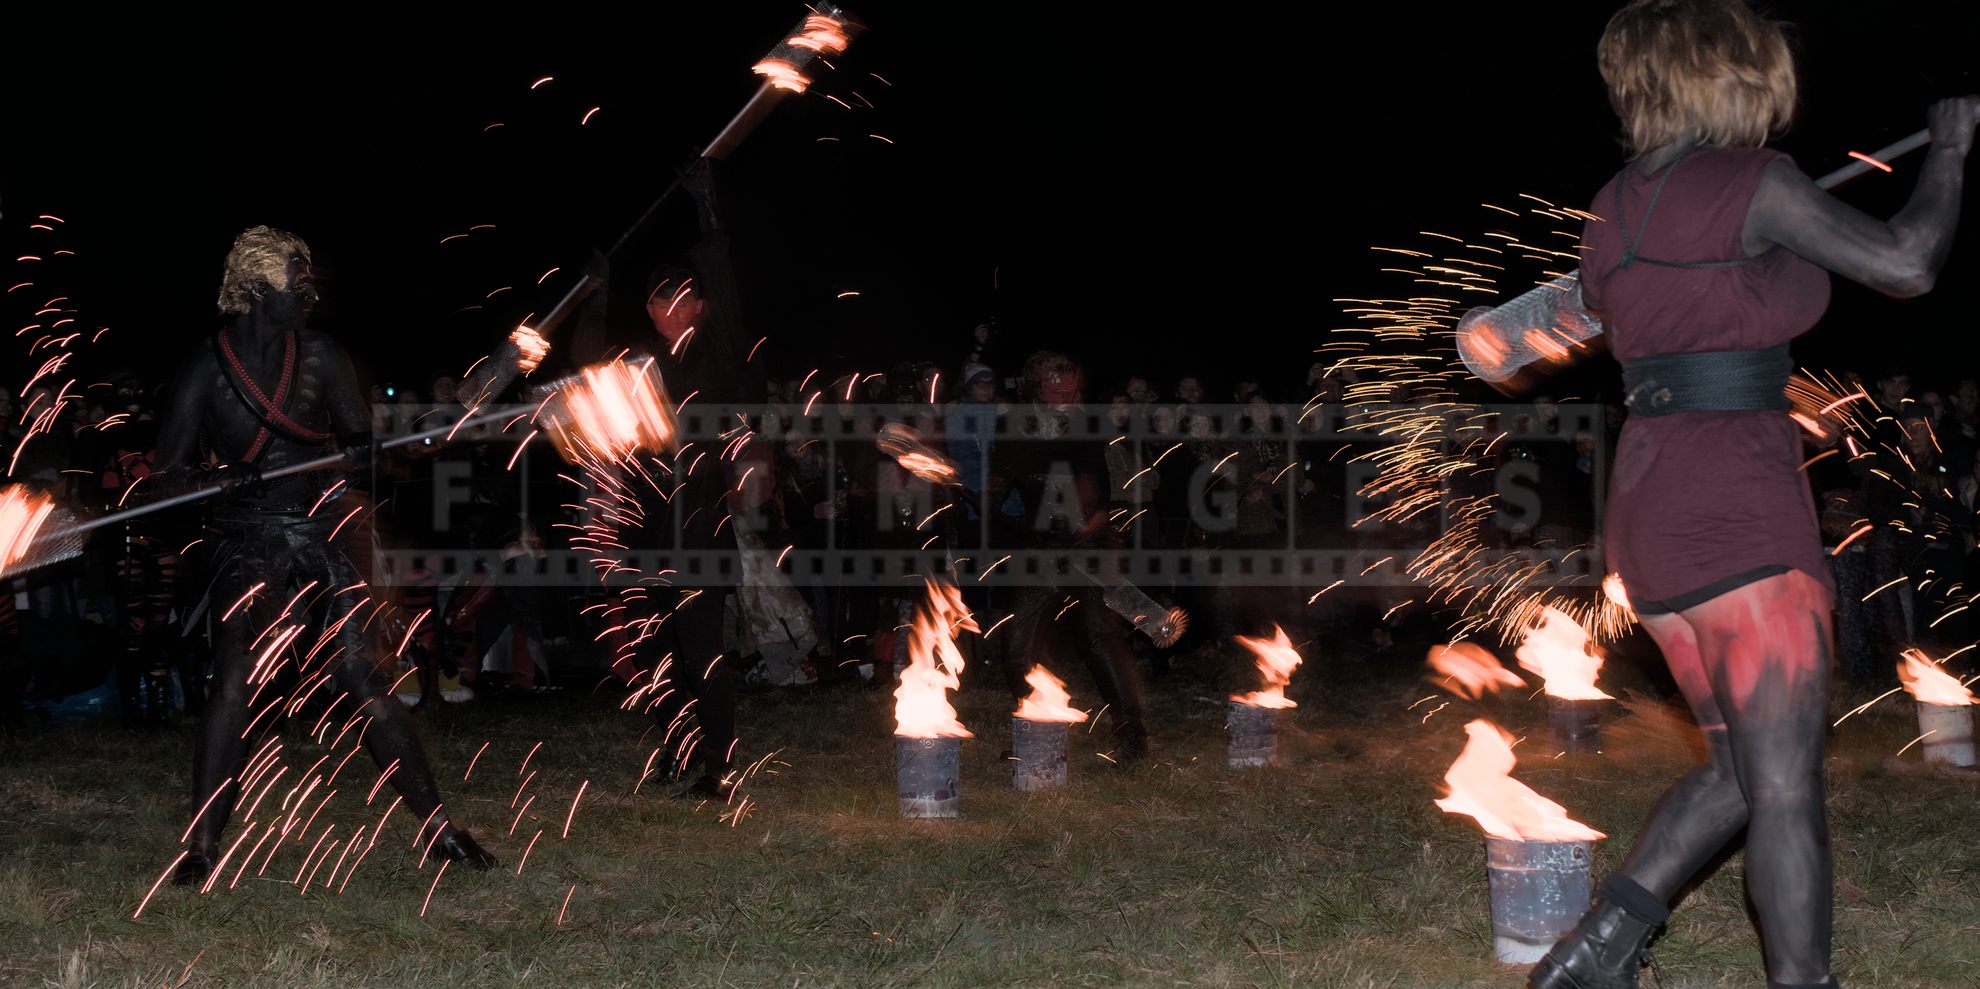 Fire sparkles fly as artist perform in front of the spectators at Beltane Fire Show at night